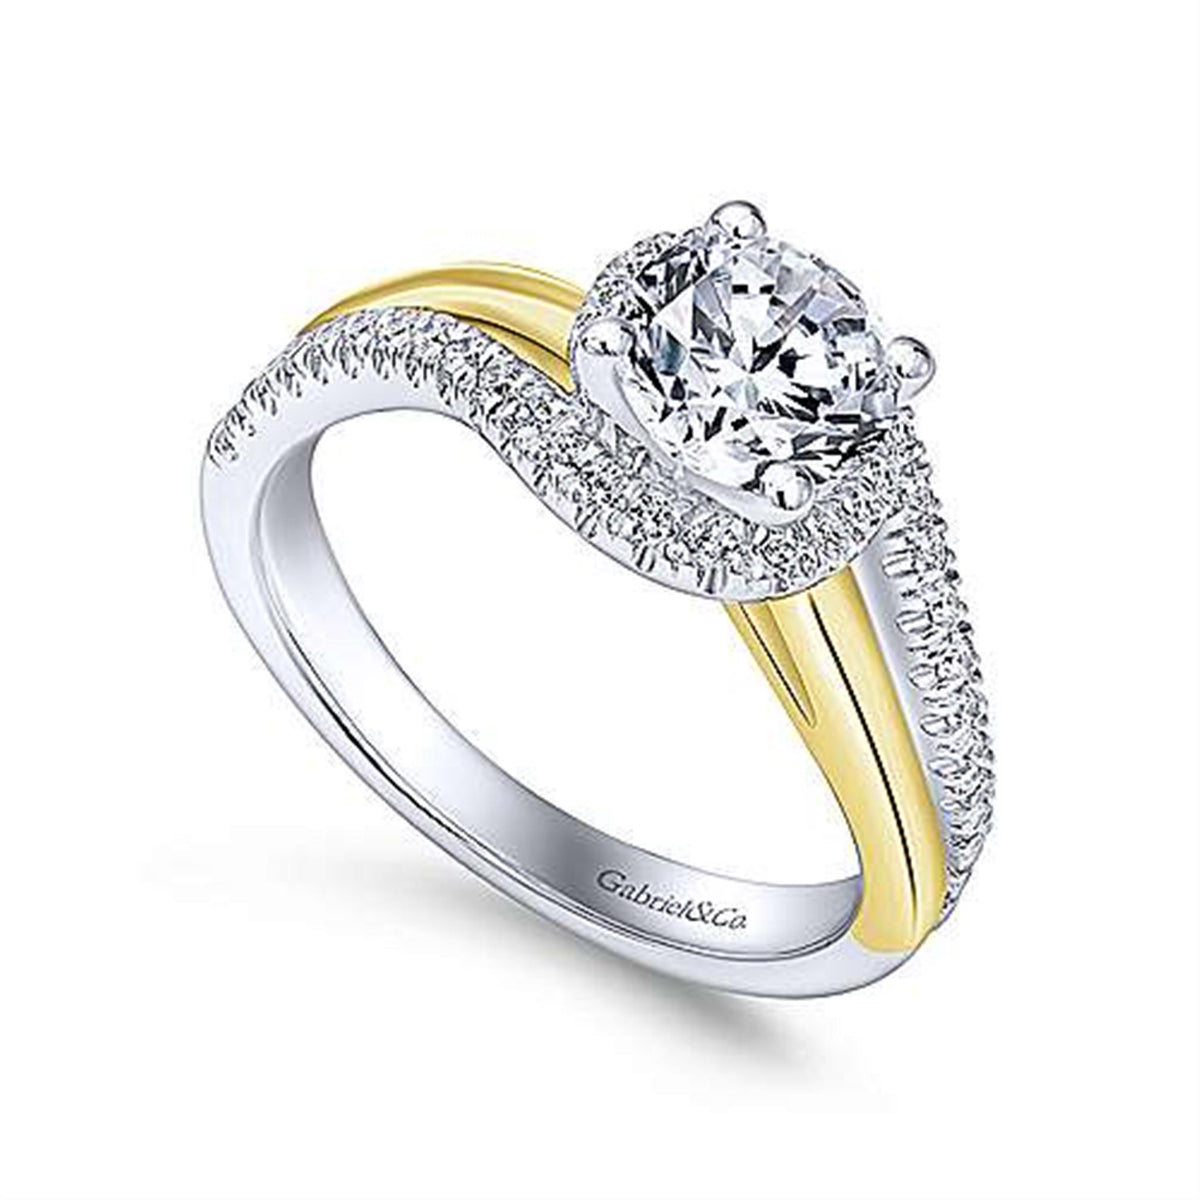 14Kt Yellow & White Gold Free-Form Engagement Ring Mounting With 0.29cttw Natural Diamonds